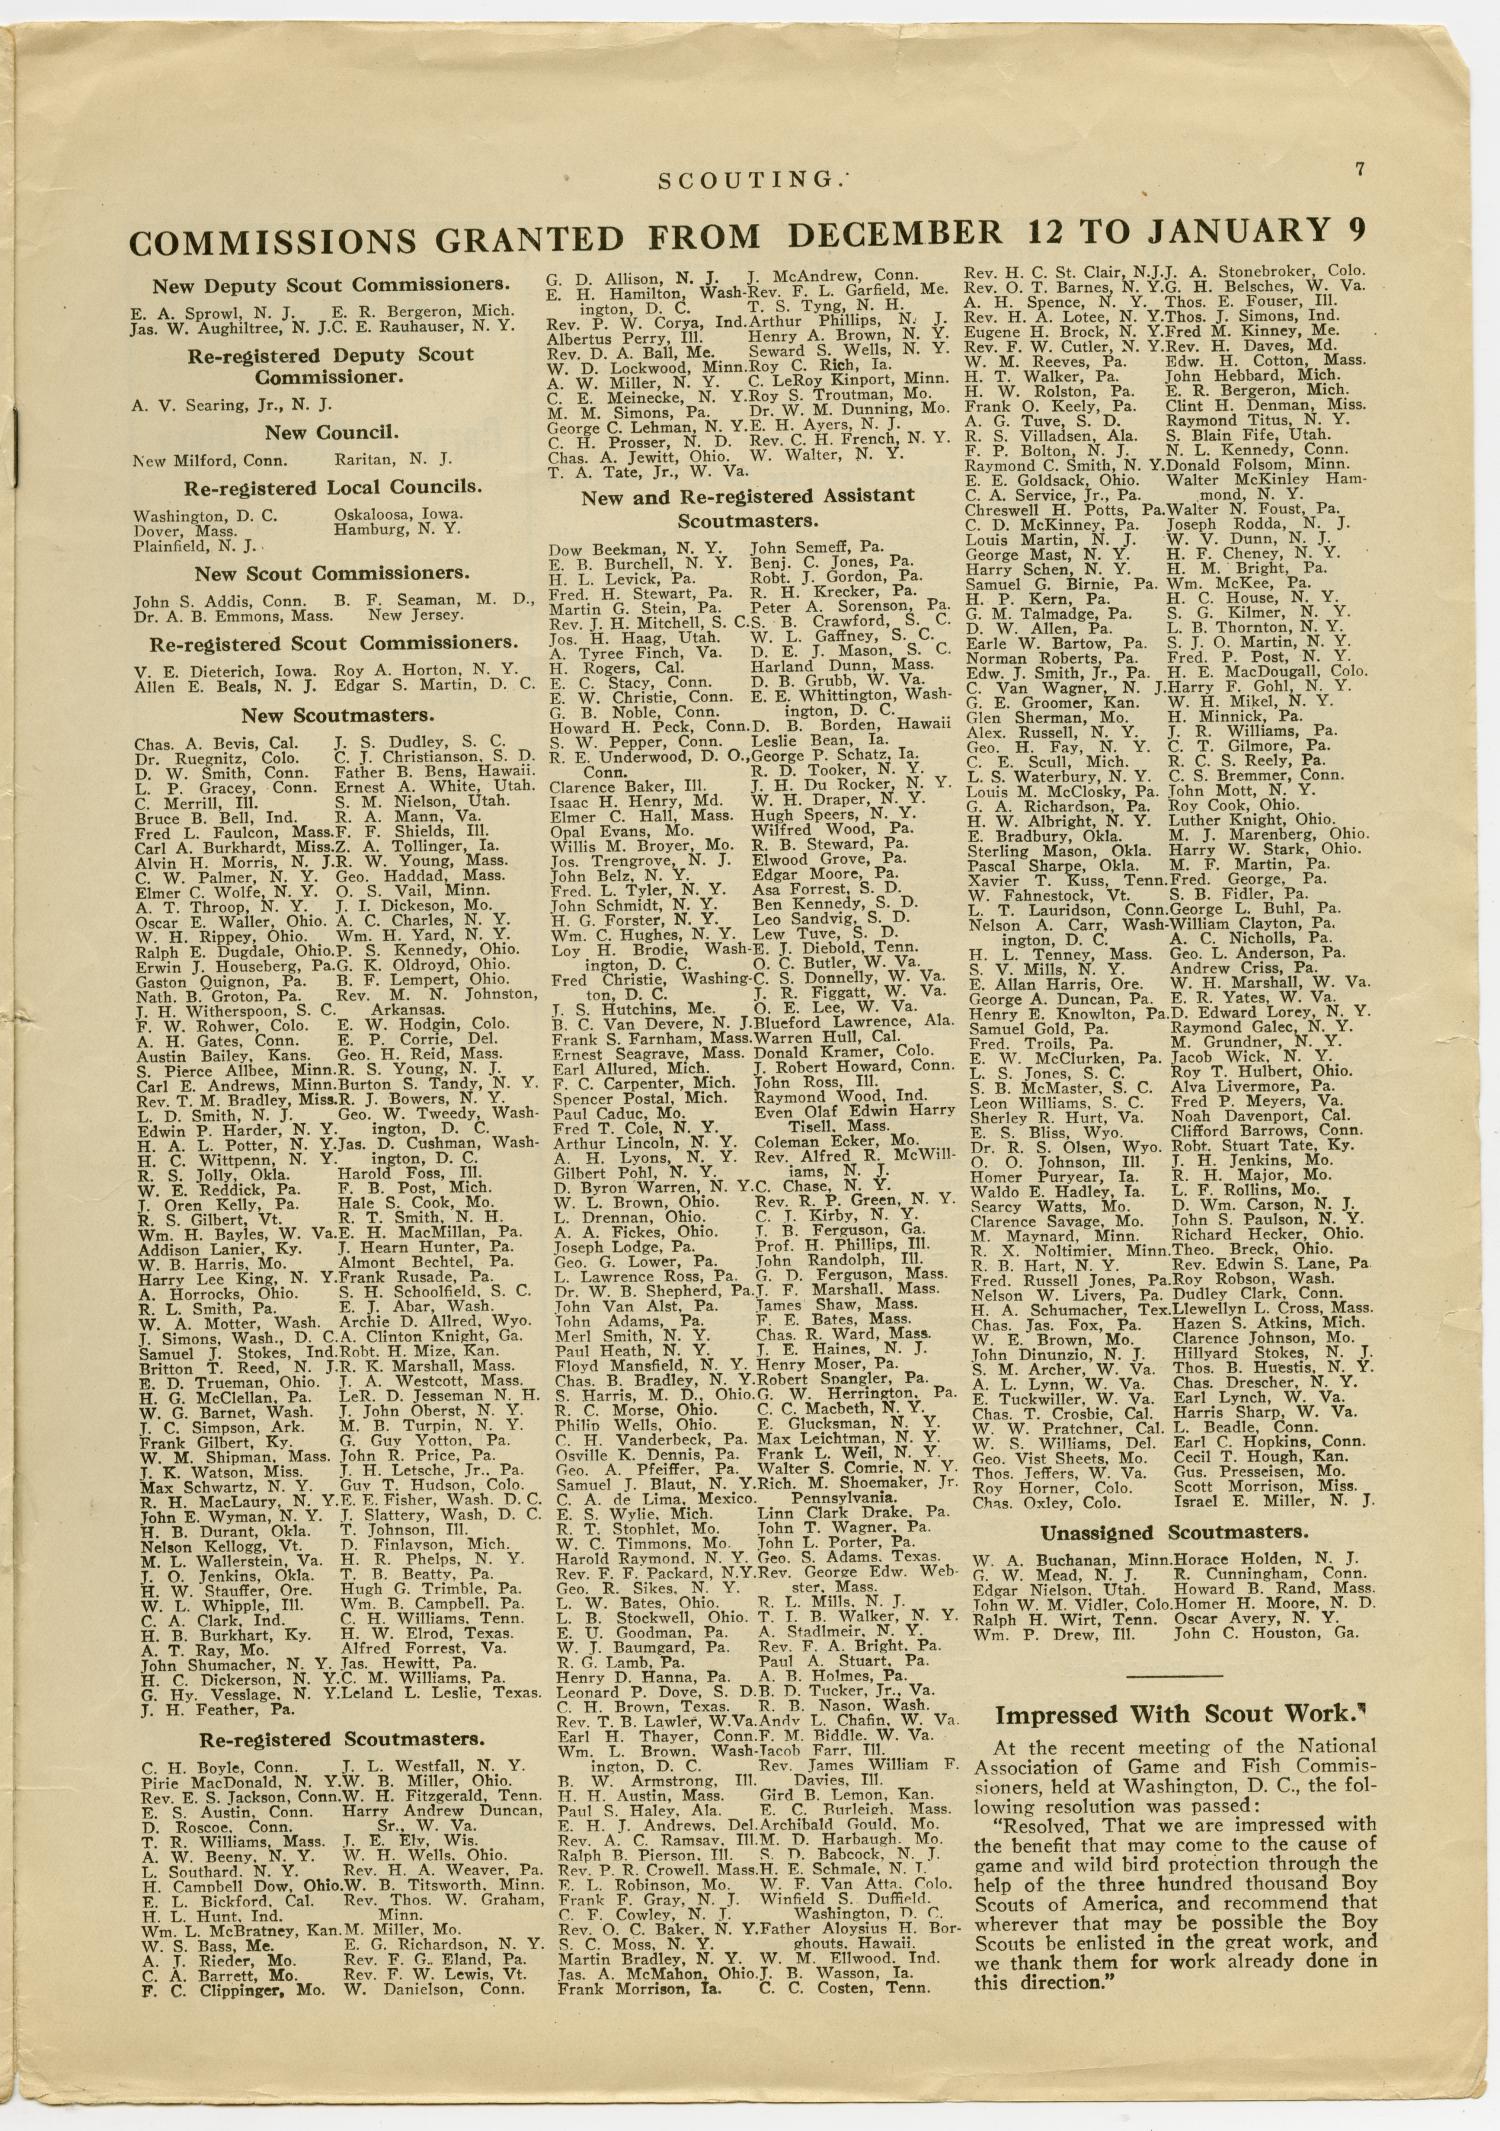 Scouting, Volume 2, Number 18, January 15, 1915
                                                
                                                    7
                                                